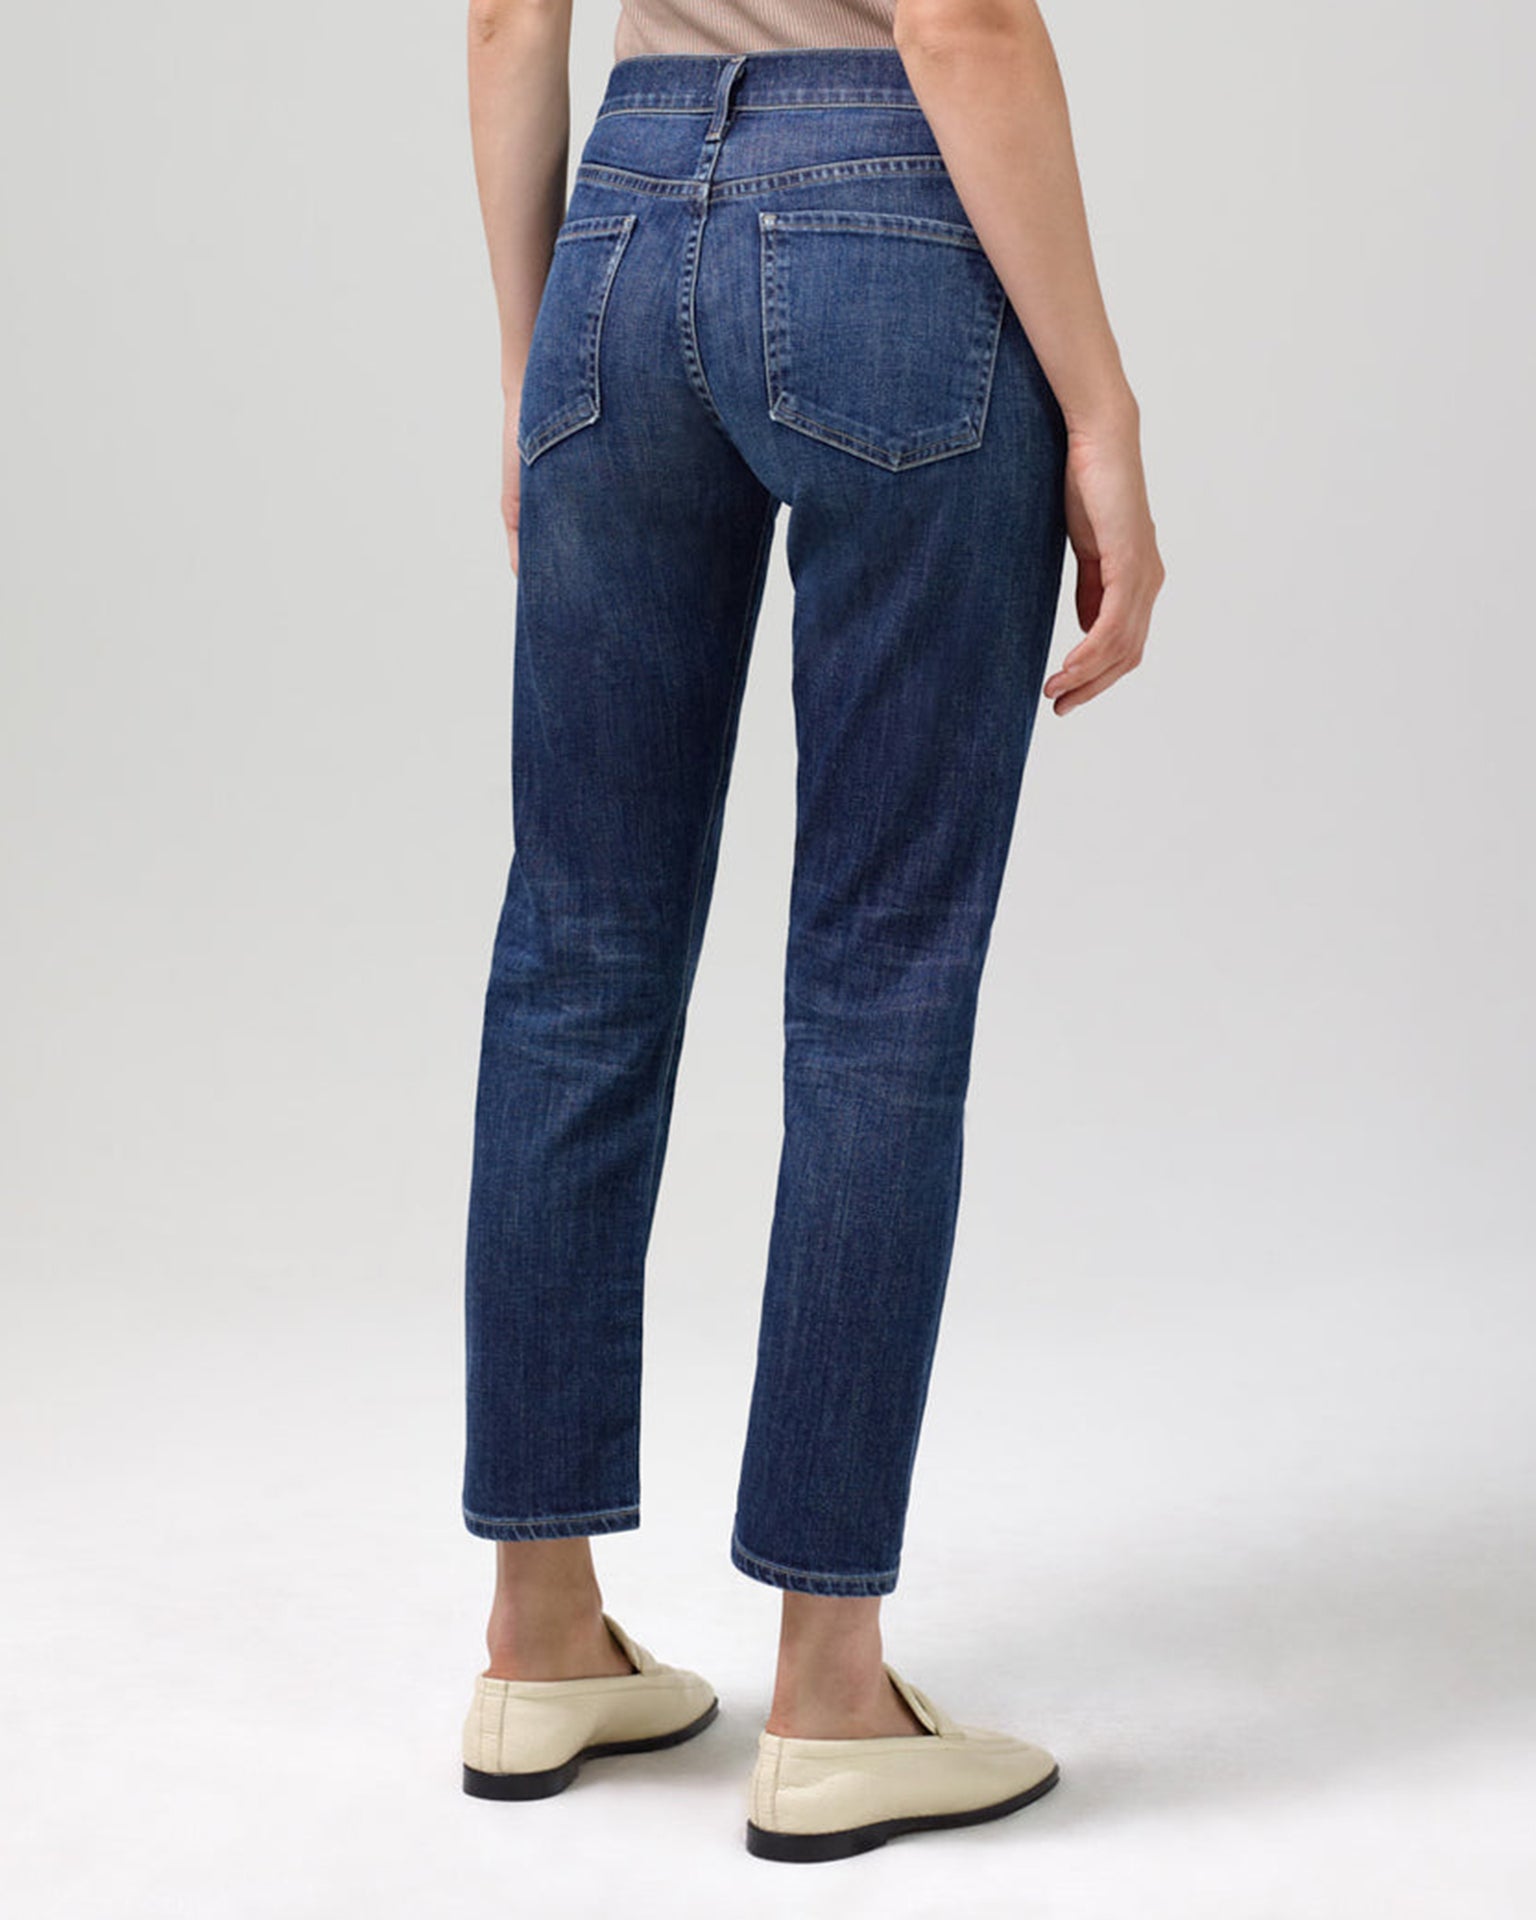 Citizens of Humanity Emerson Slim Fit Boyfriend Jeans - Bliss Boutiques